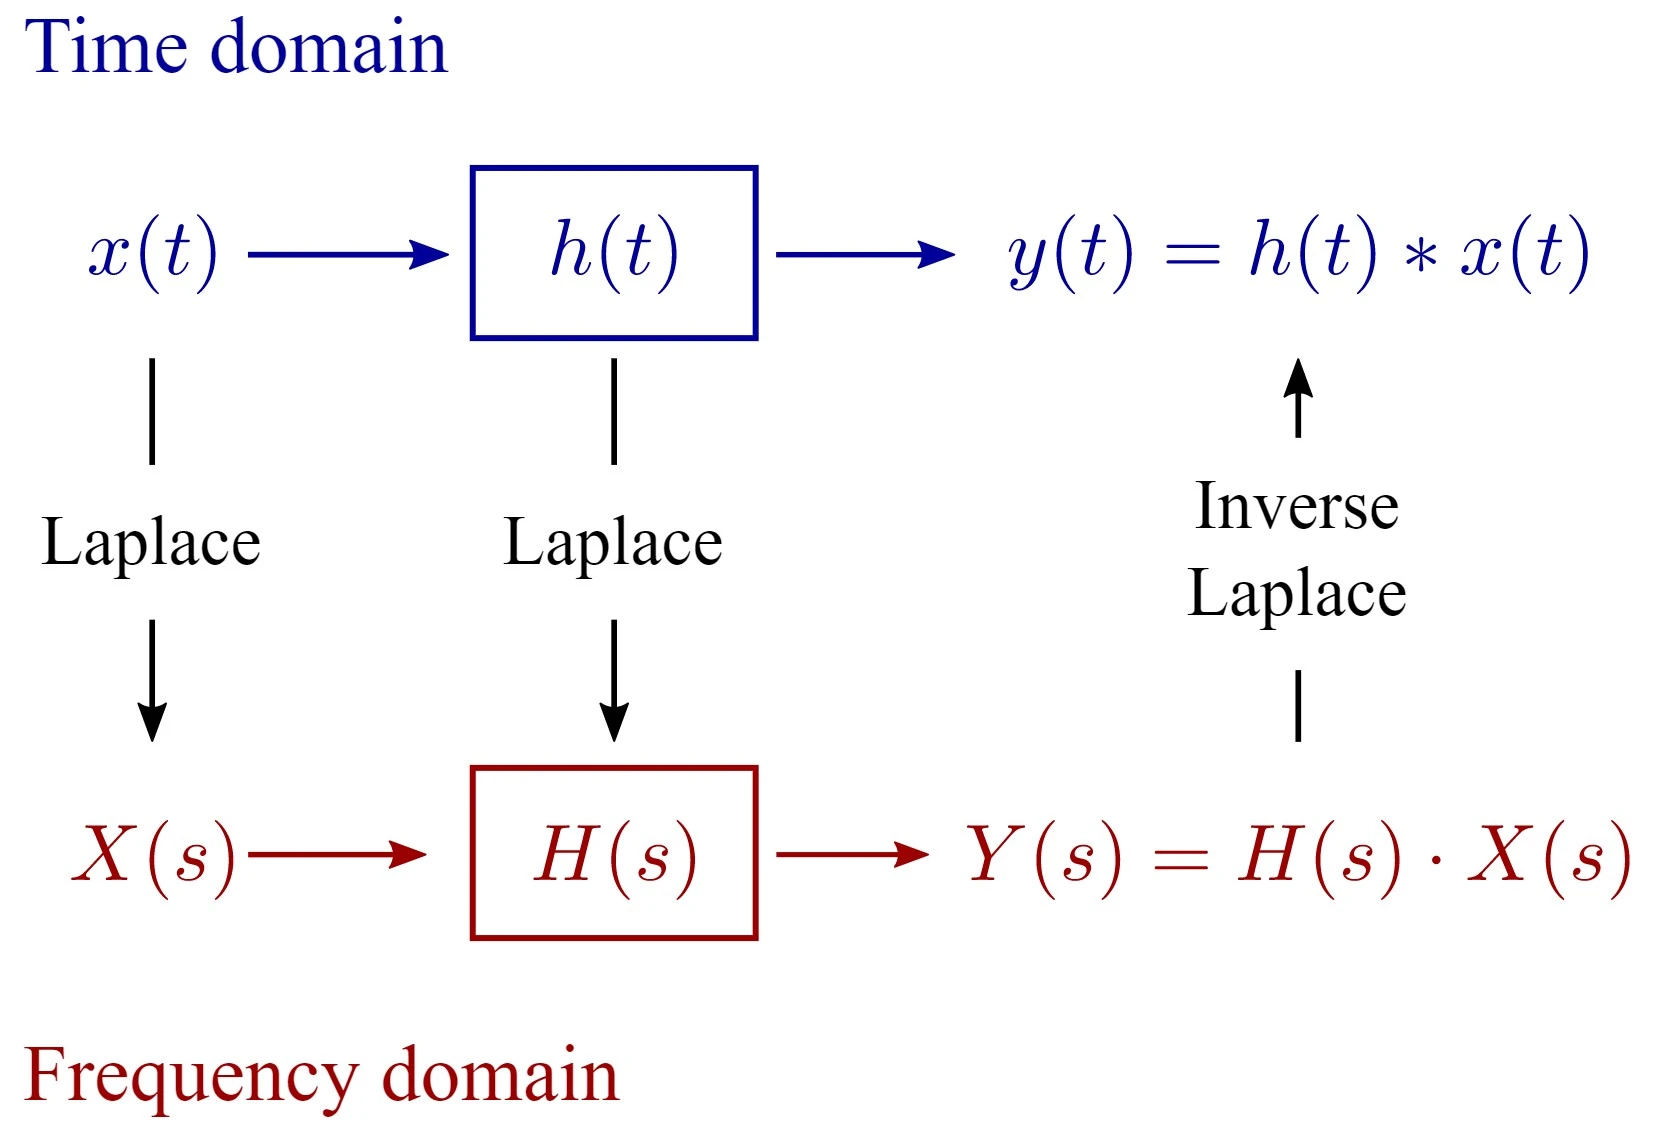 Source: [https://resources.pcb.cadence.com/blog/2021-simplify-rlc-circuit-analysis-with-the-rlc-transfer-function](https://resources.pcb.cadence.com/blog/2021-simplify-rlc-circuit-analysis-with-the-rlc-transfer-function)